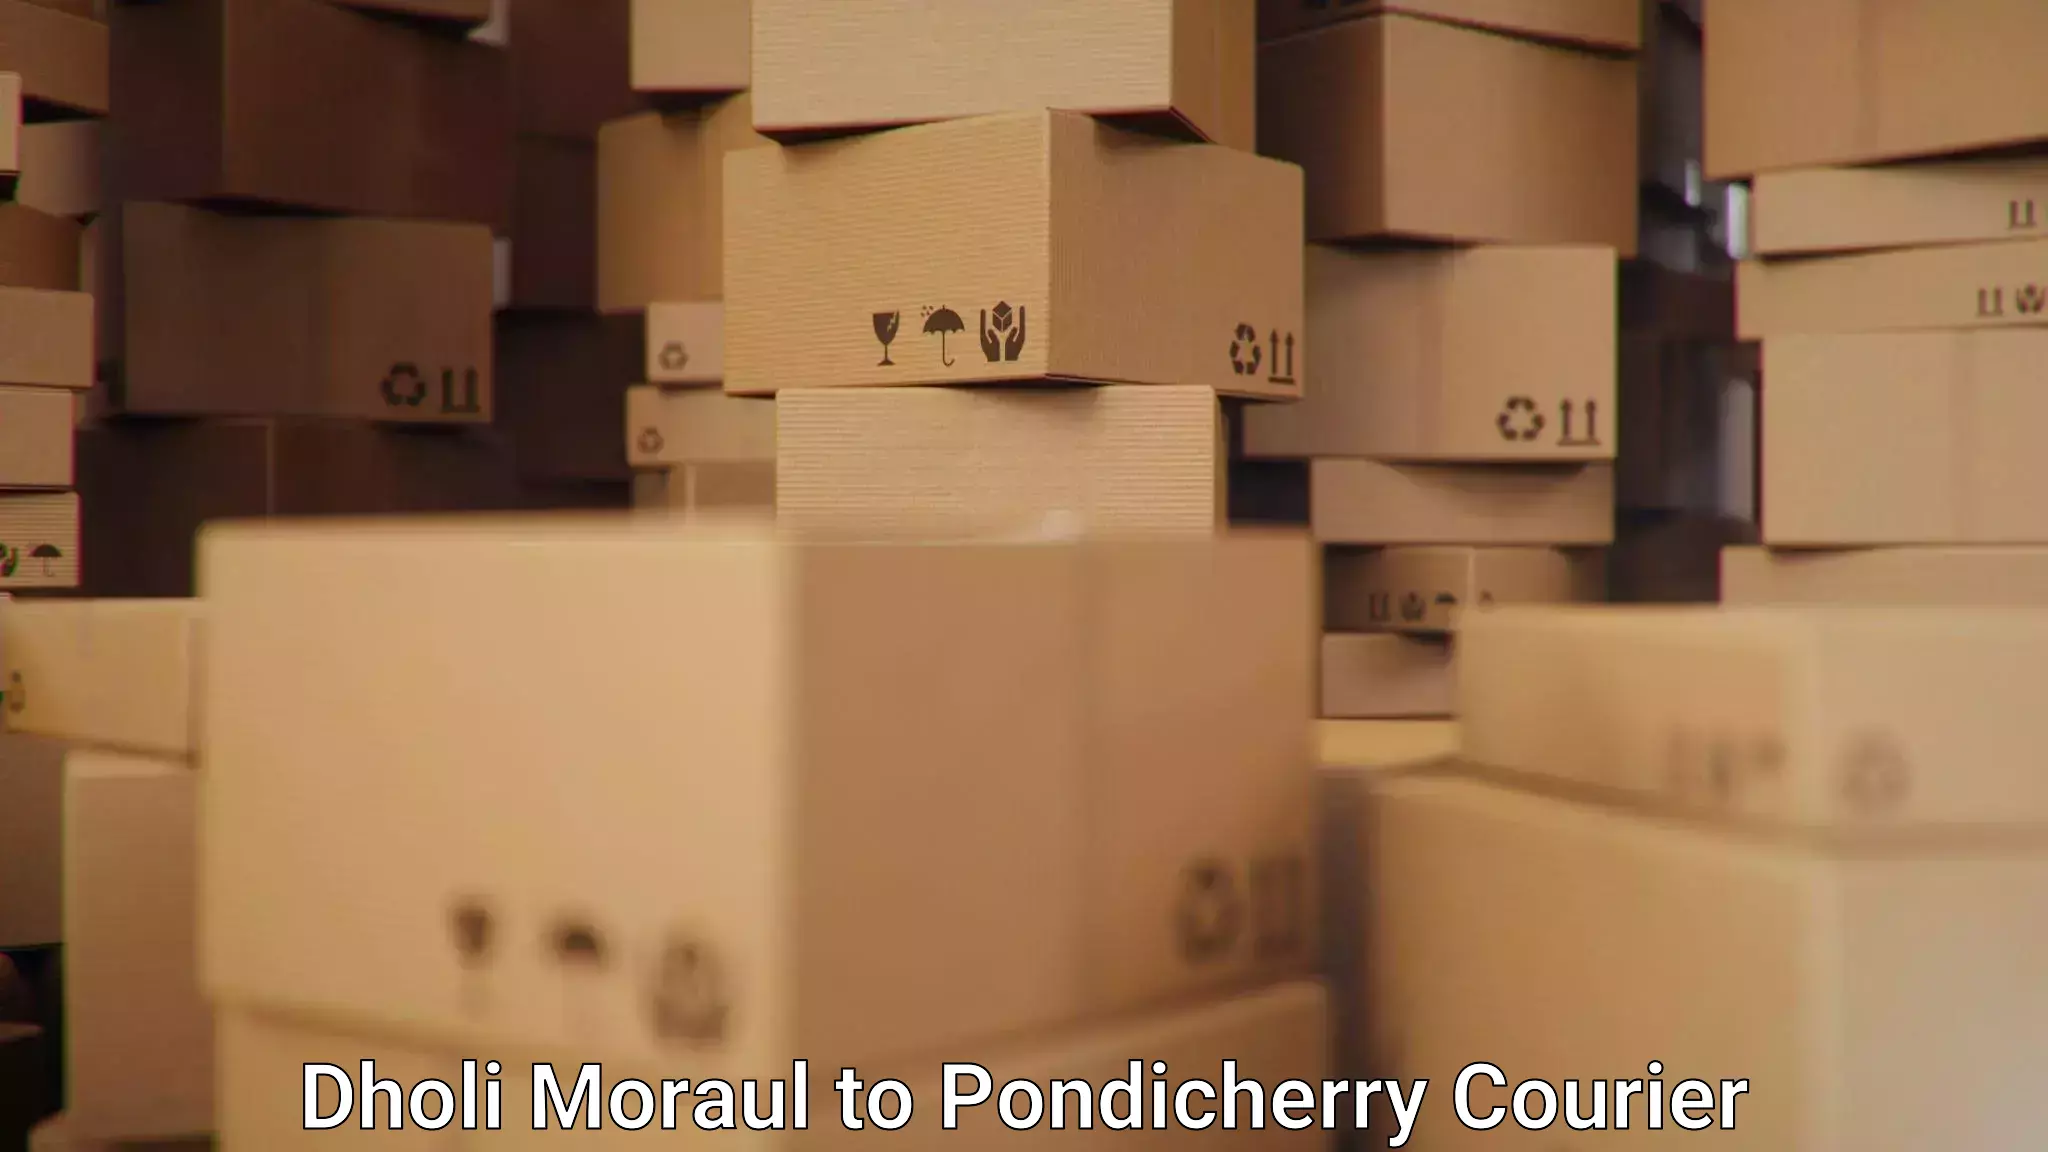 On-call courier service Dholi Moraul to Pondicherry